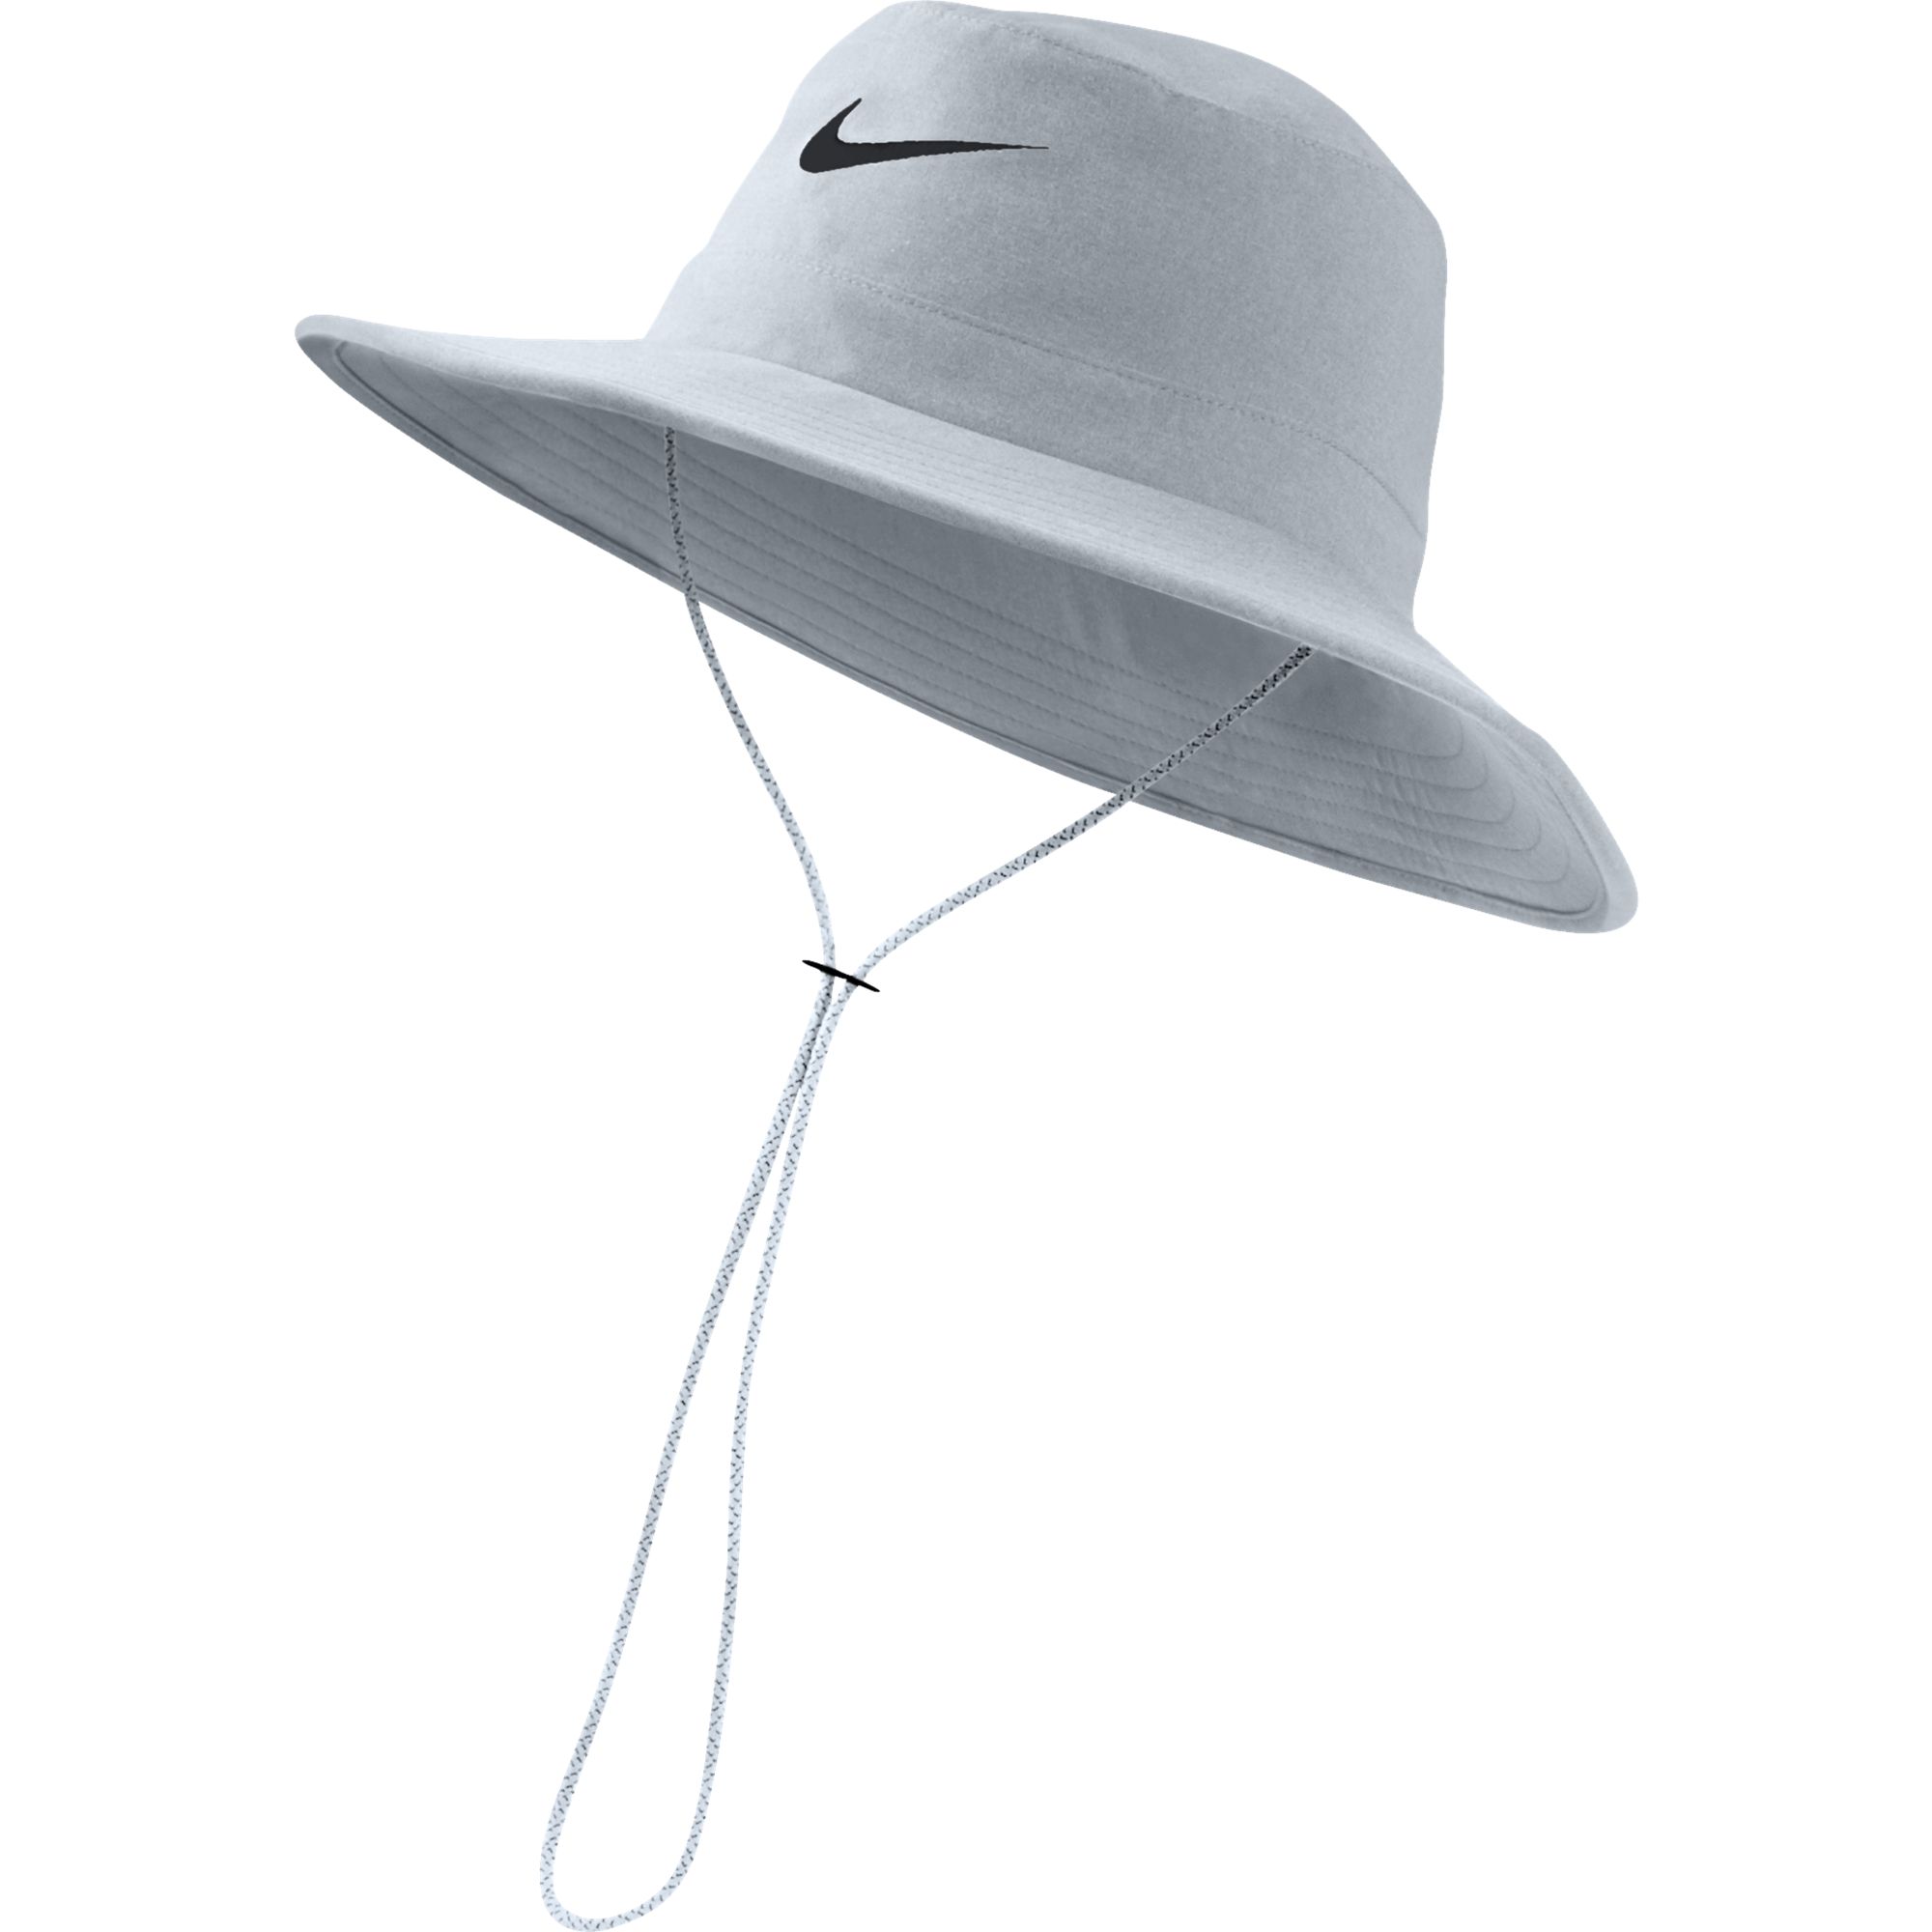 New 2014 Nike Sun Bucket Hat/Cap COLOR: Lt. Magnet Grey SIZE: Small ...